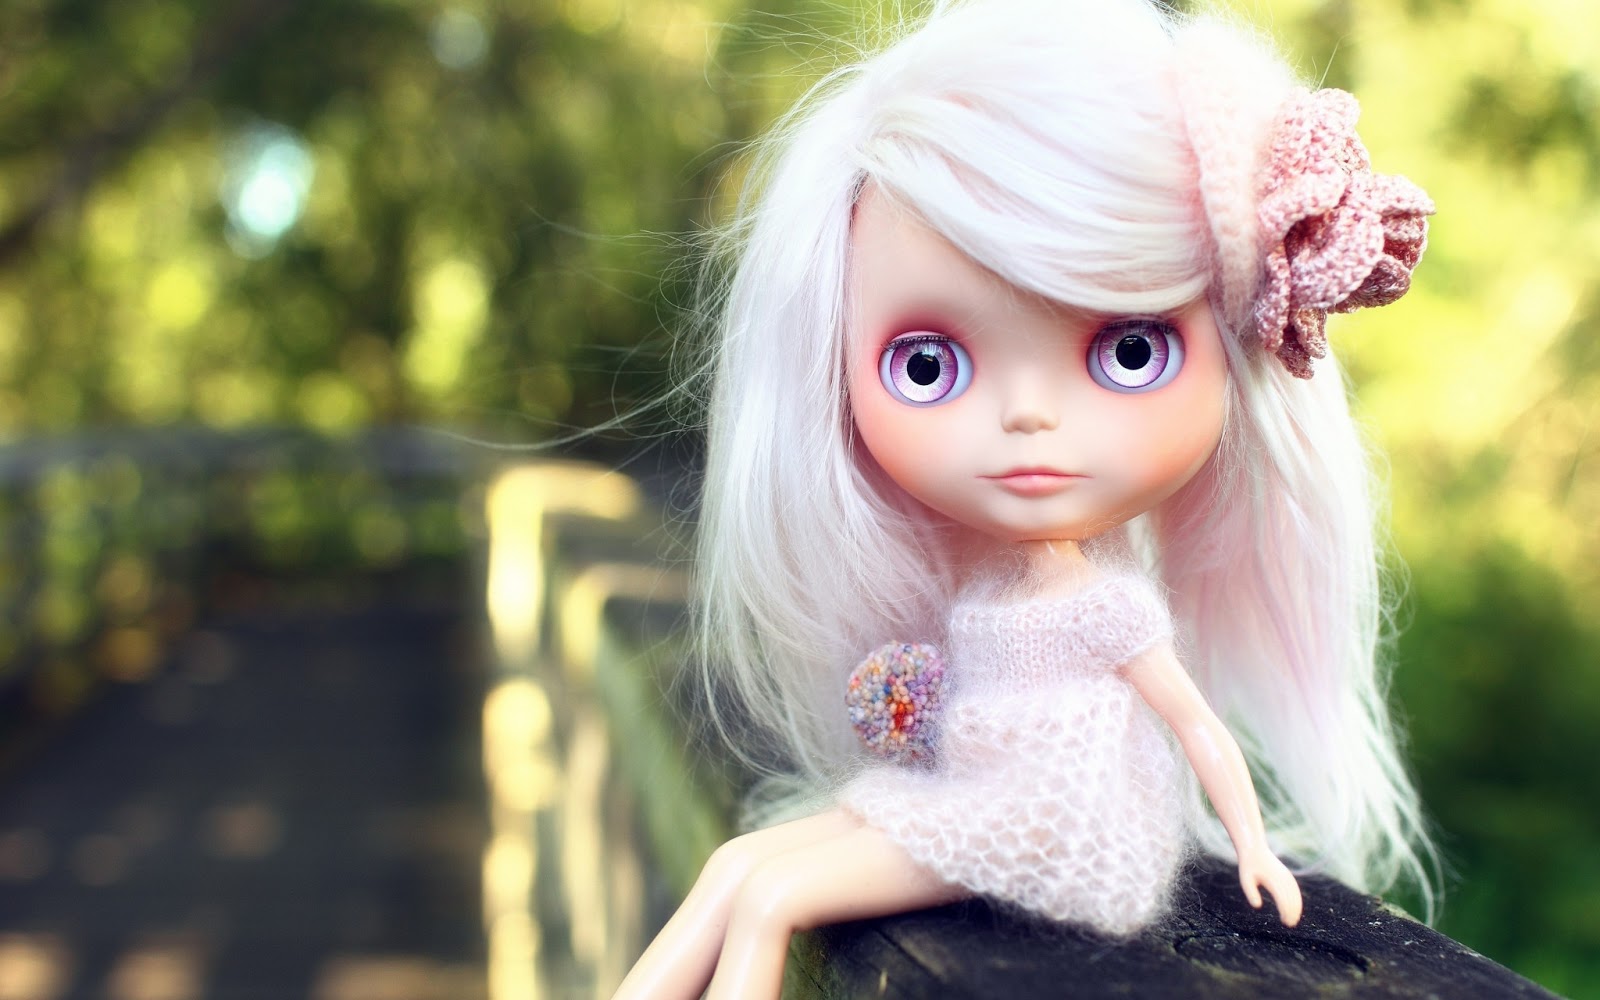 Awesome wallpapers: Beautiful Dolls Free Download Wallpapers